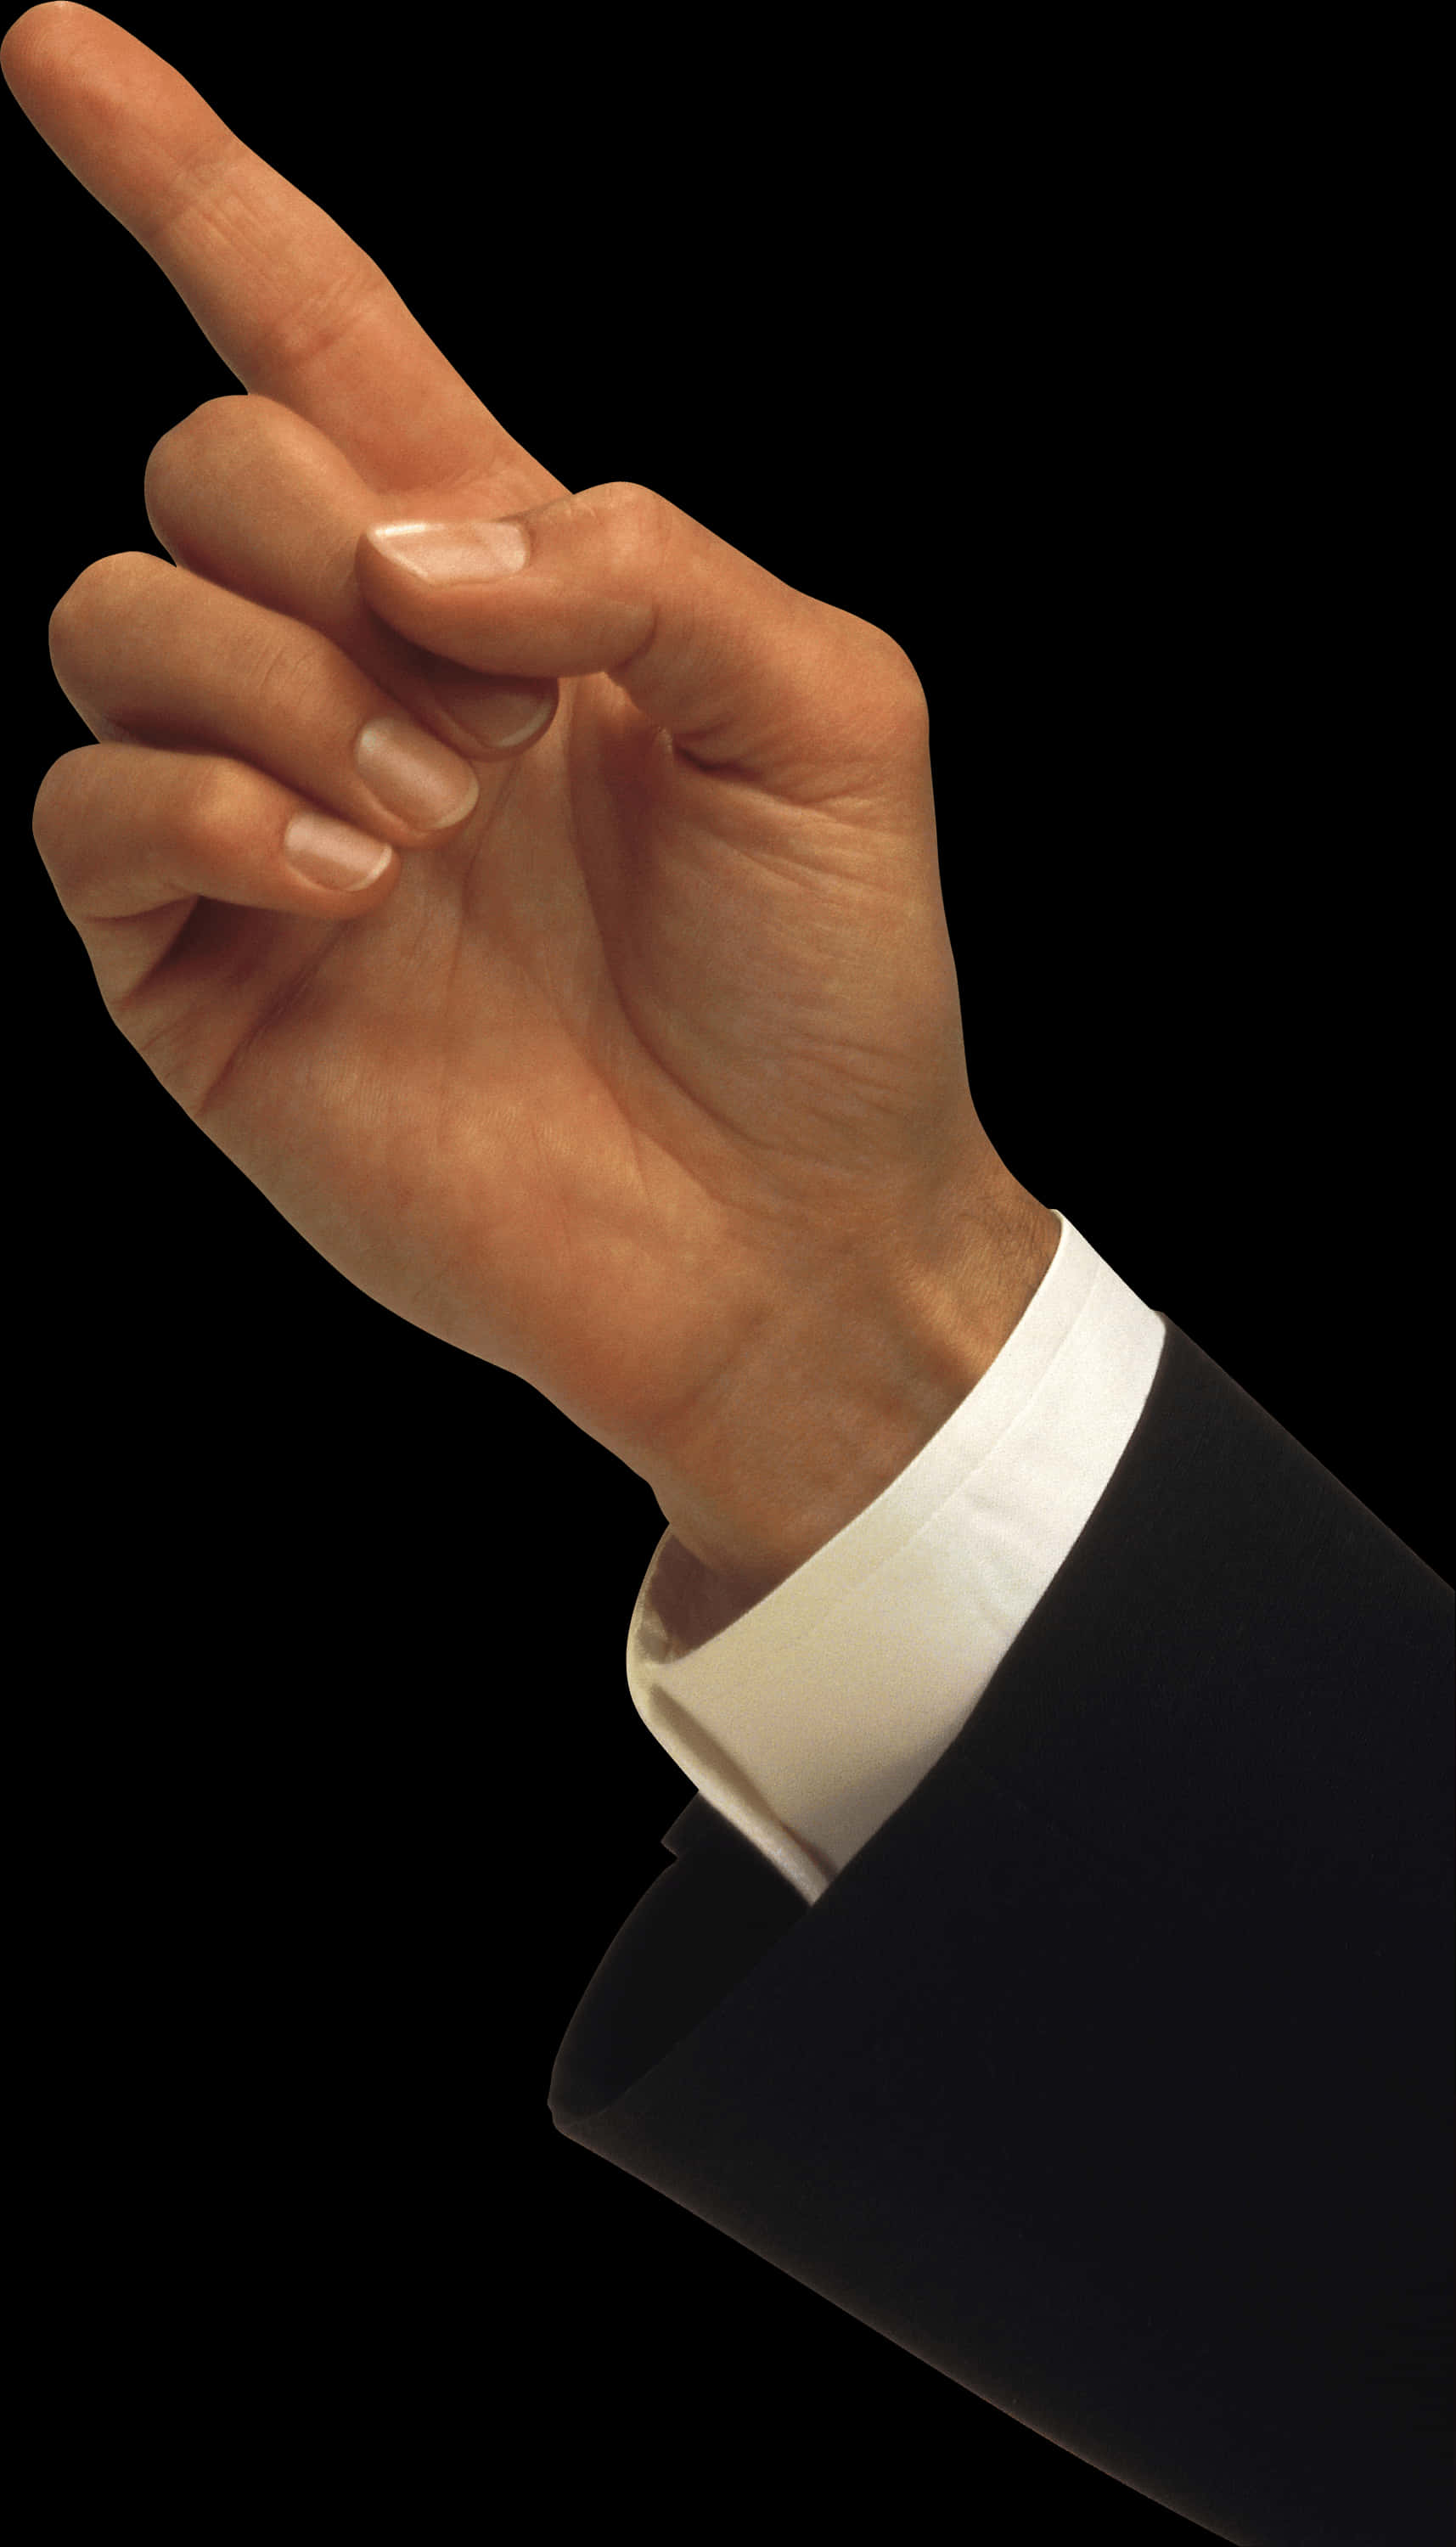 Pointing Hand Gesture Black Background PNG